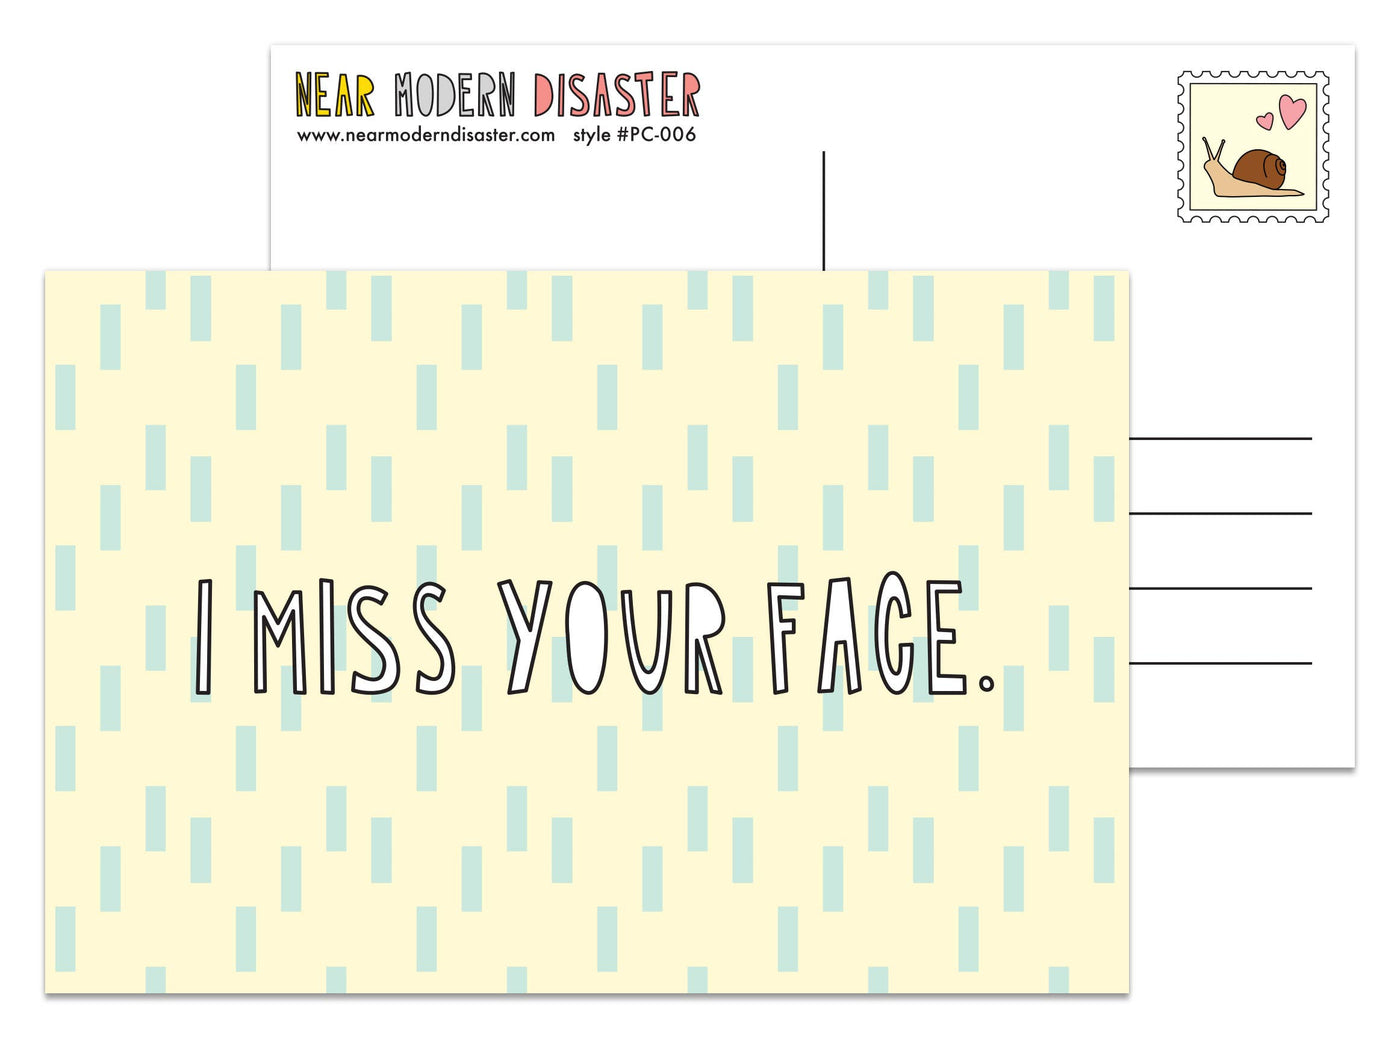 Near Modern Disaster - I Miss Your Face - 4x6 postcard